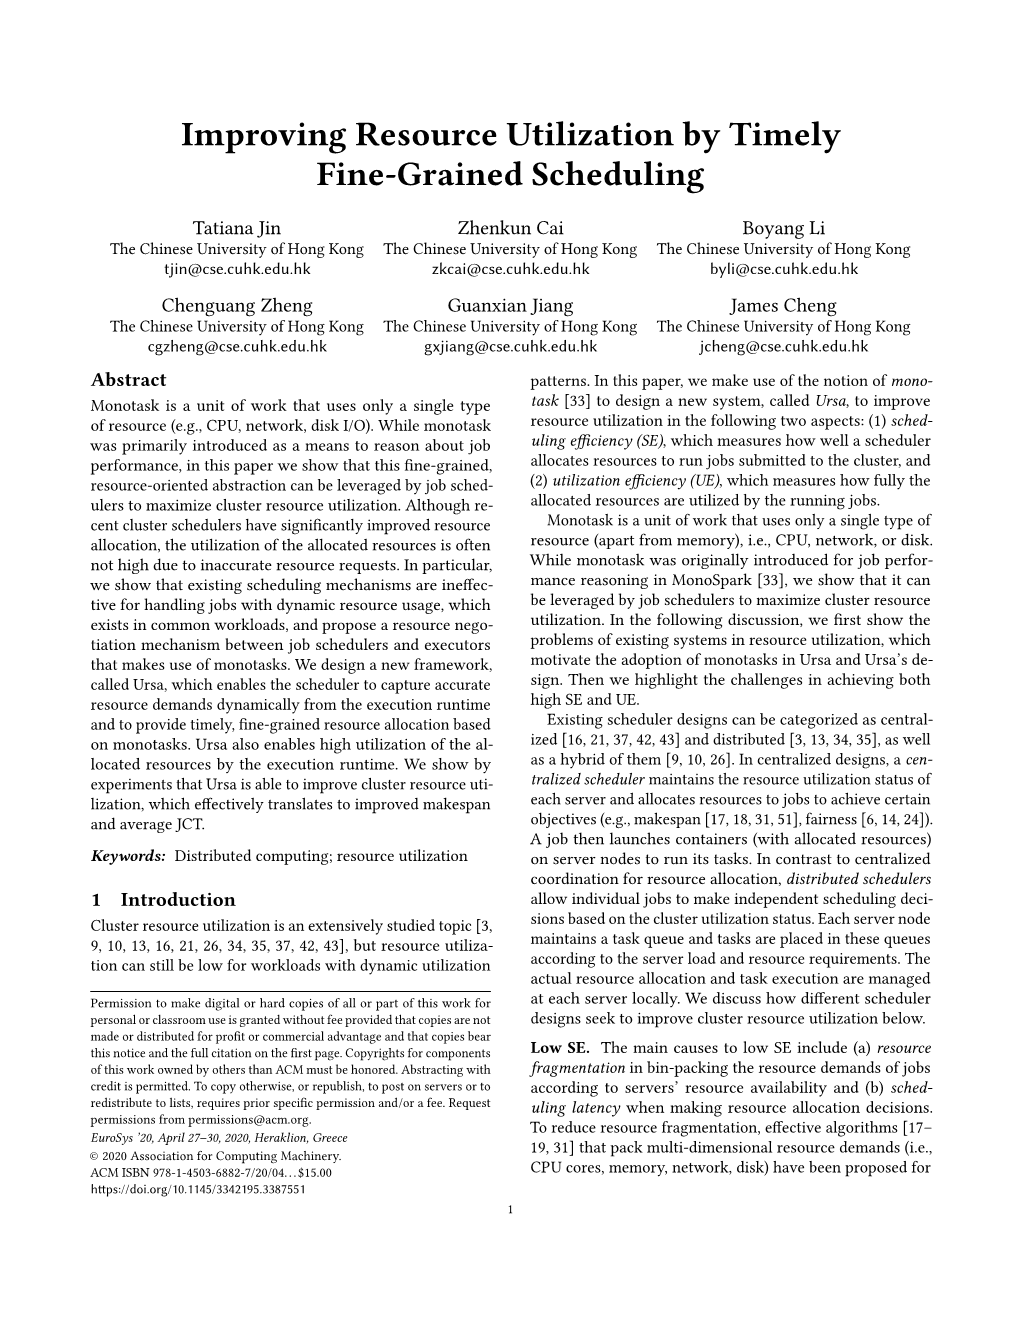 Improving Resource Utilization by Timely Fine-Grained Scheduling